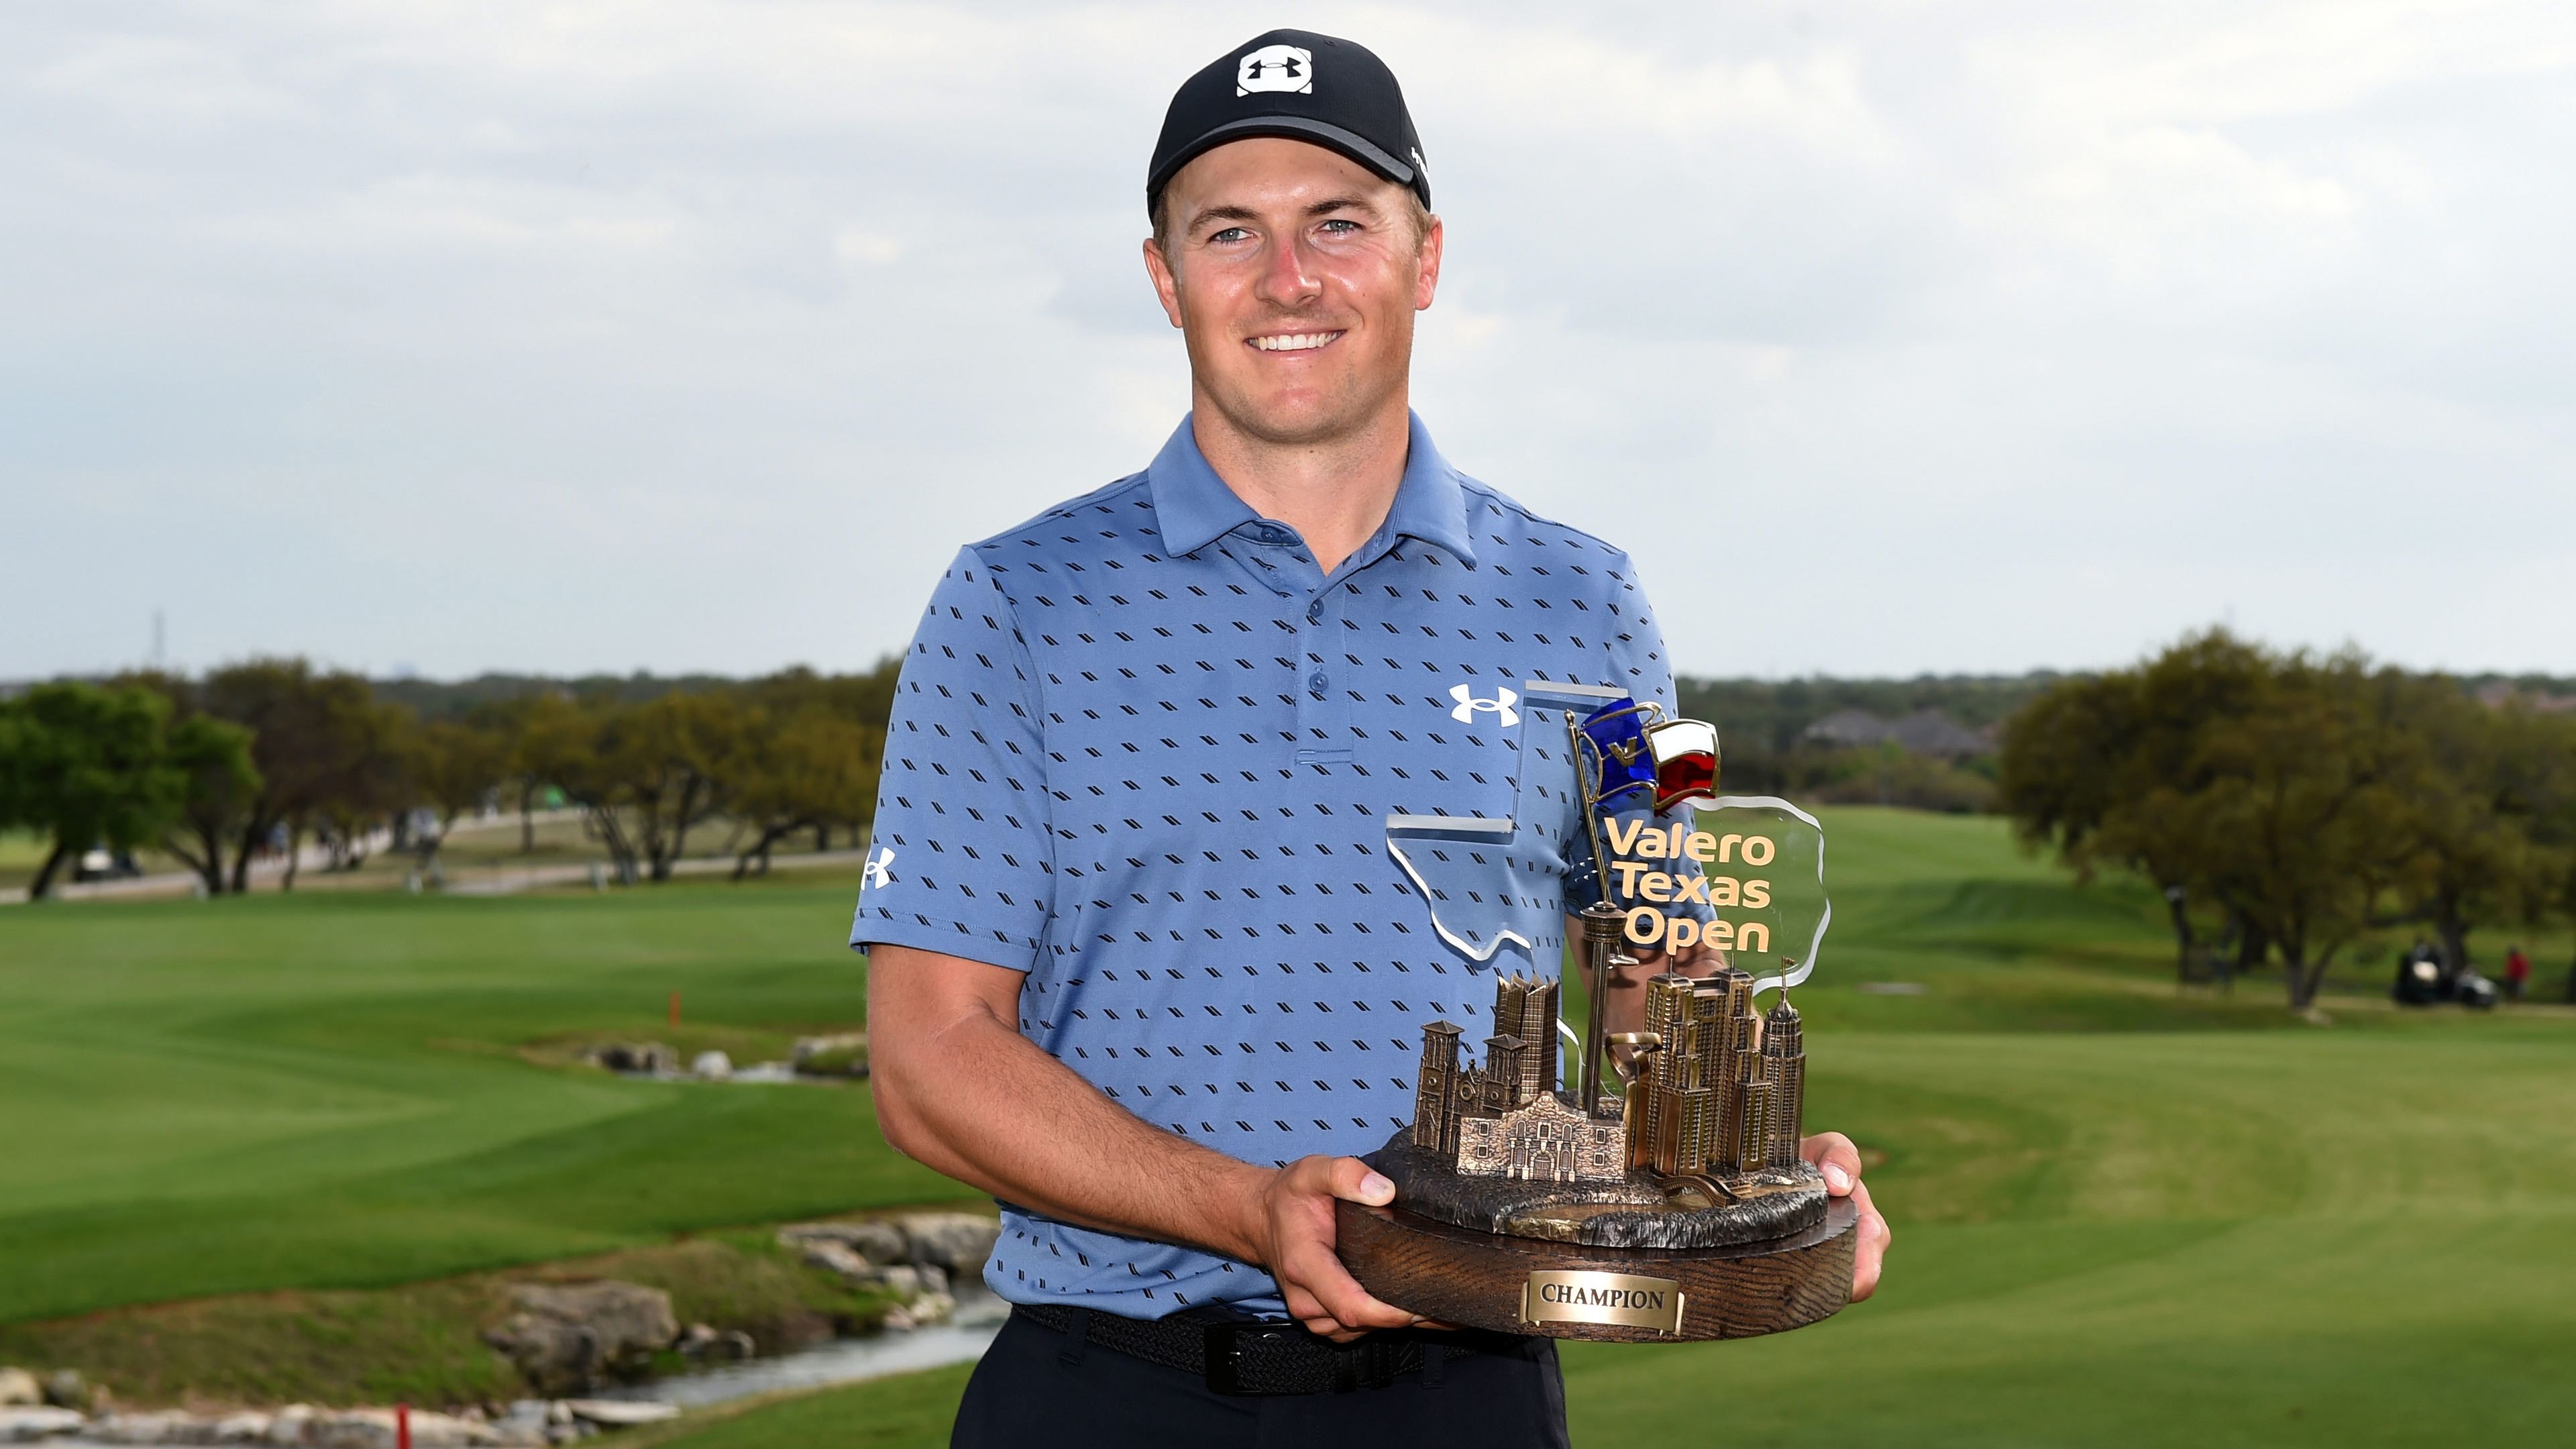 Jordan Spieth poses with the trophy after winning the Texas Open.